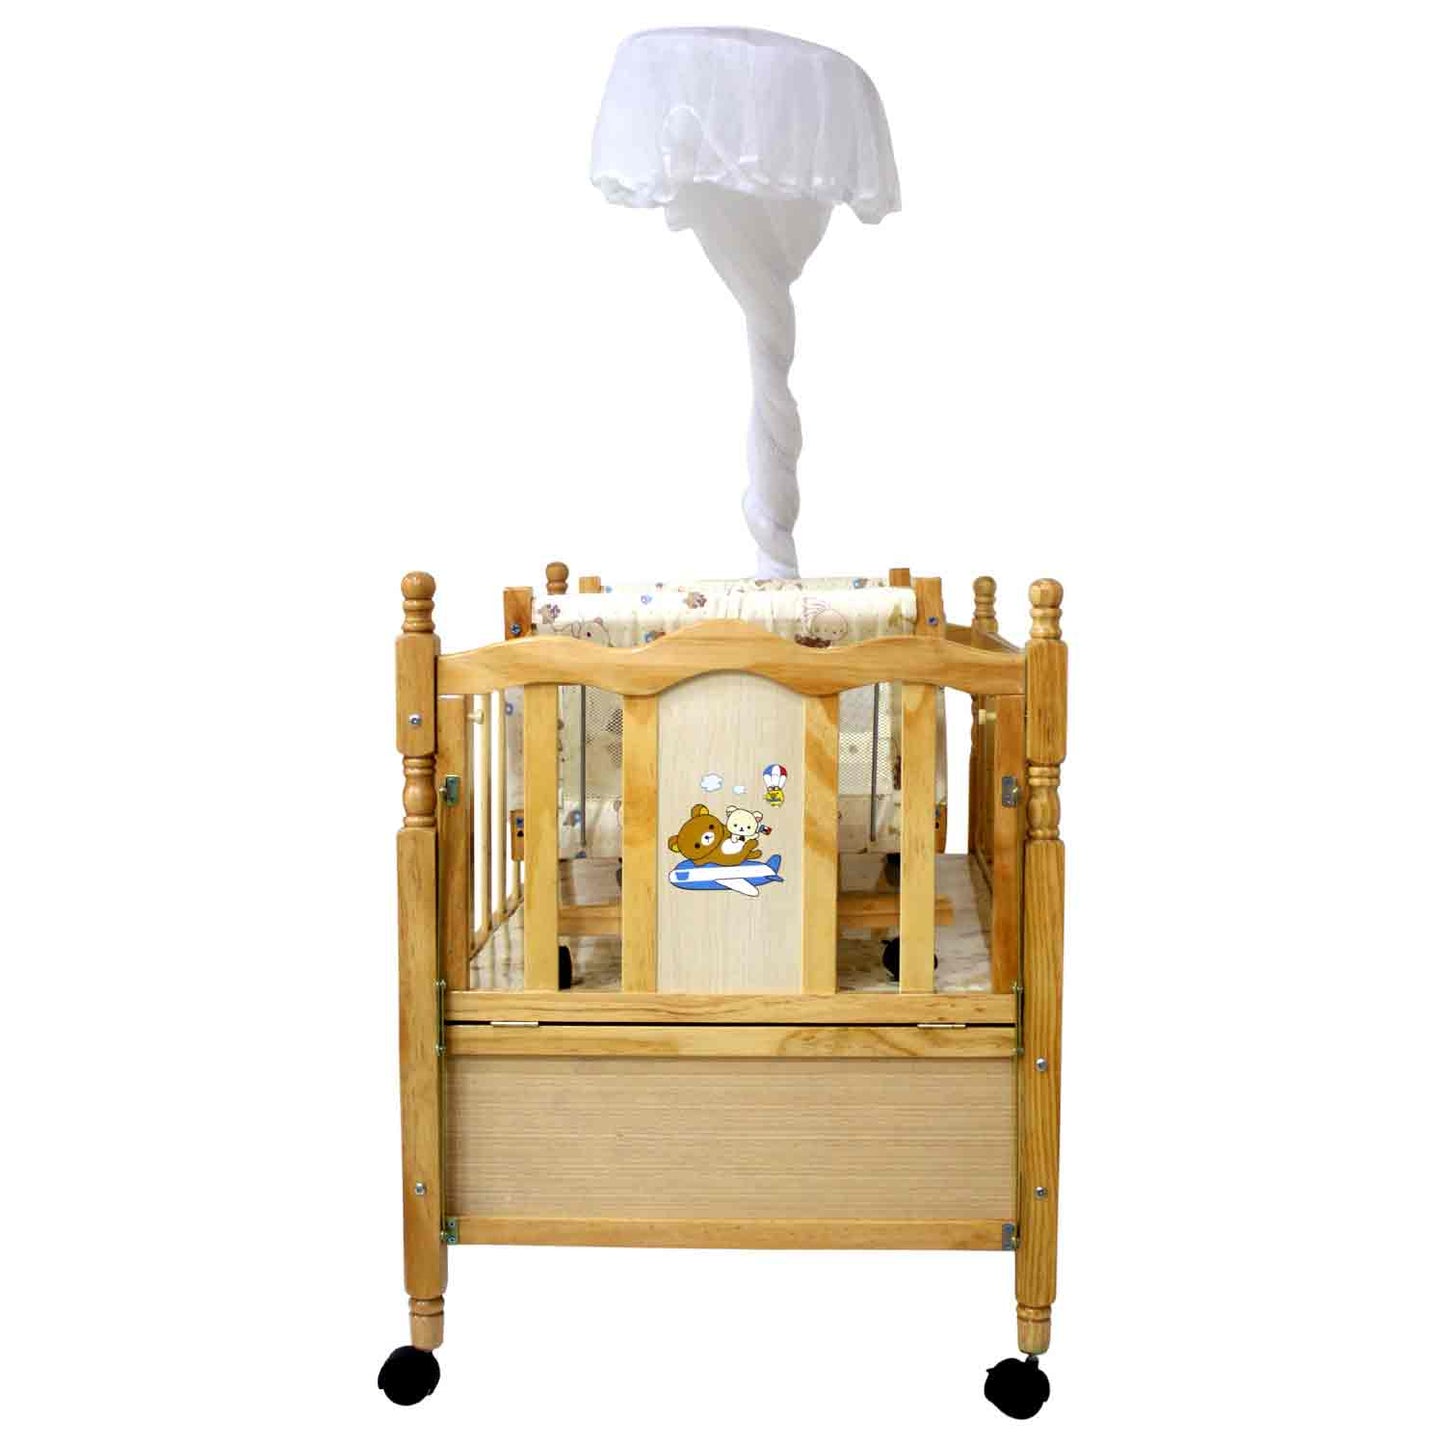 Baby Deluxe Wooden Cot(Without Packing)